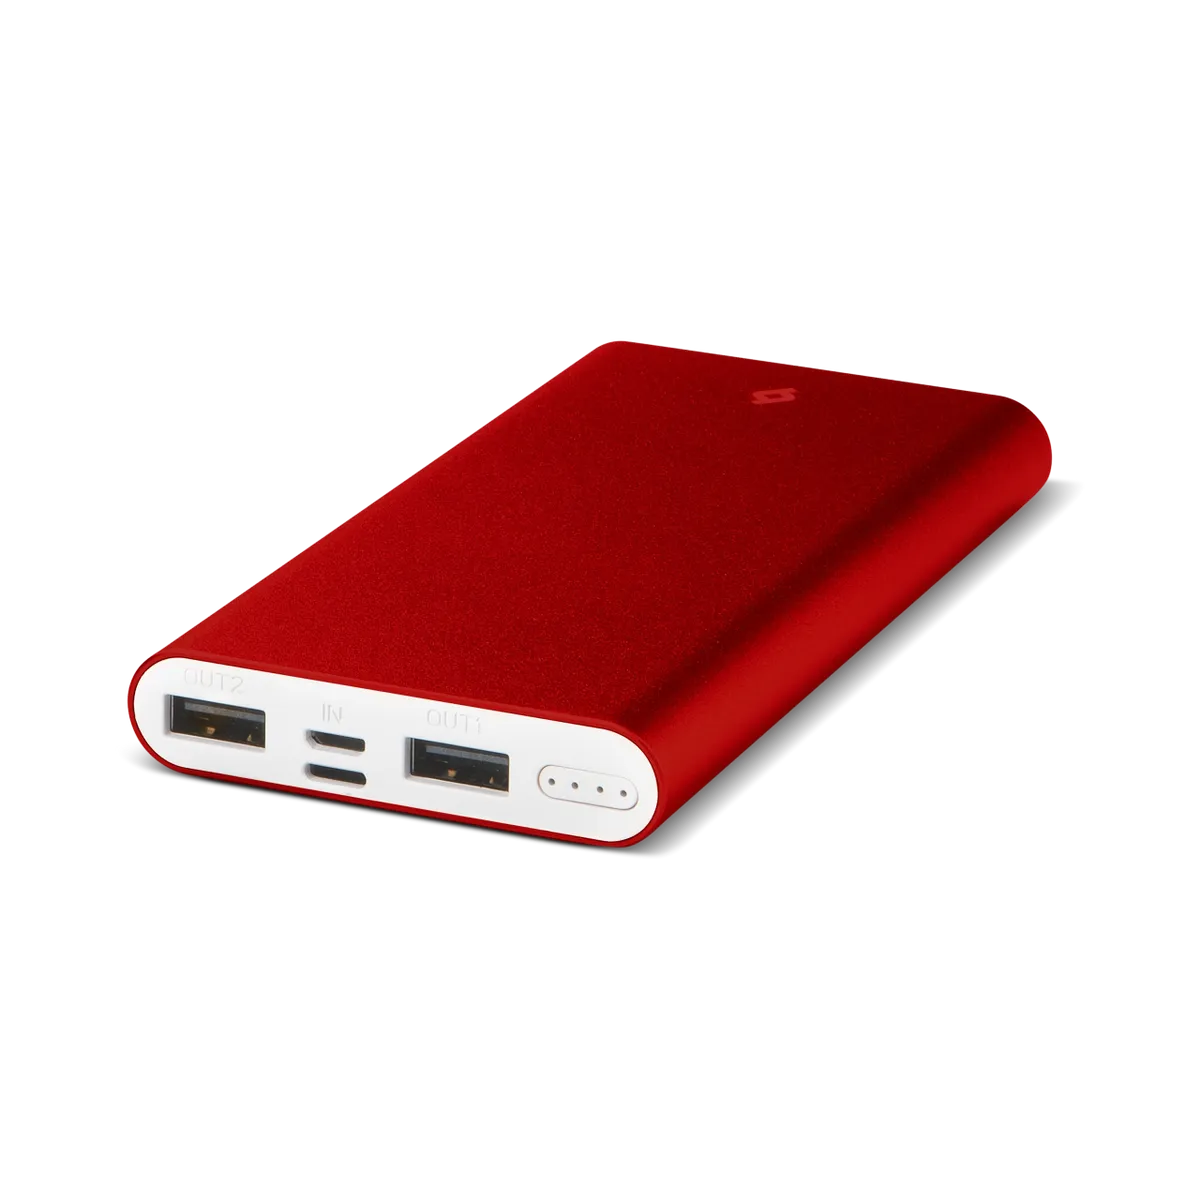 ttec AlumiSlim S Universal Mobile Charger Power Bank 10000 mAh in red